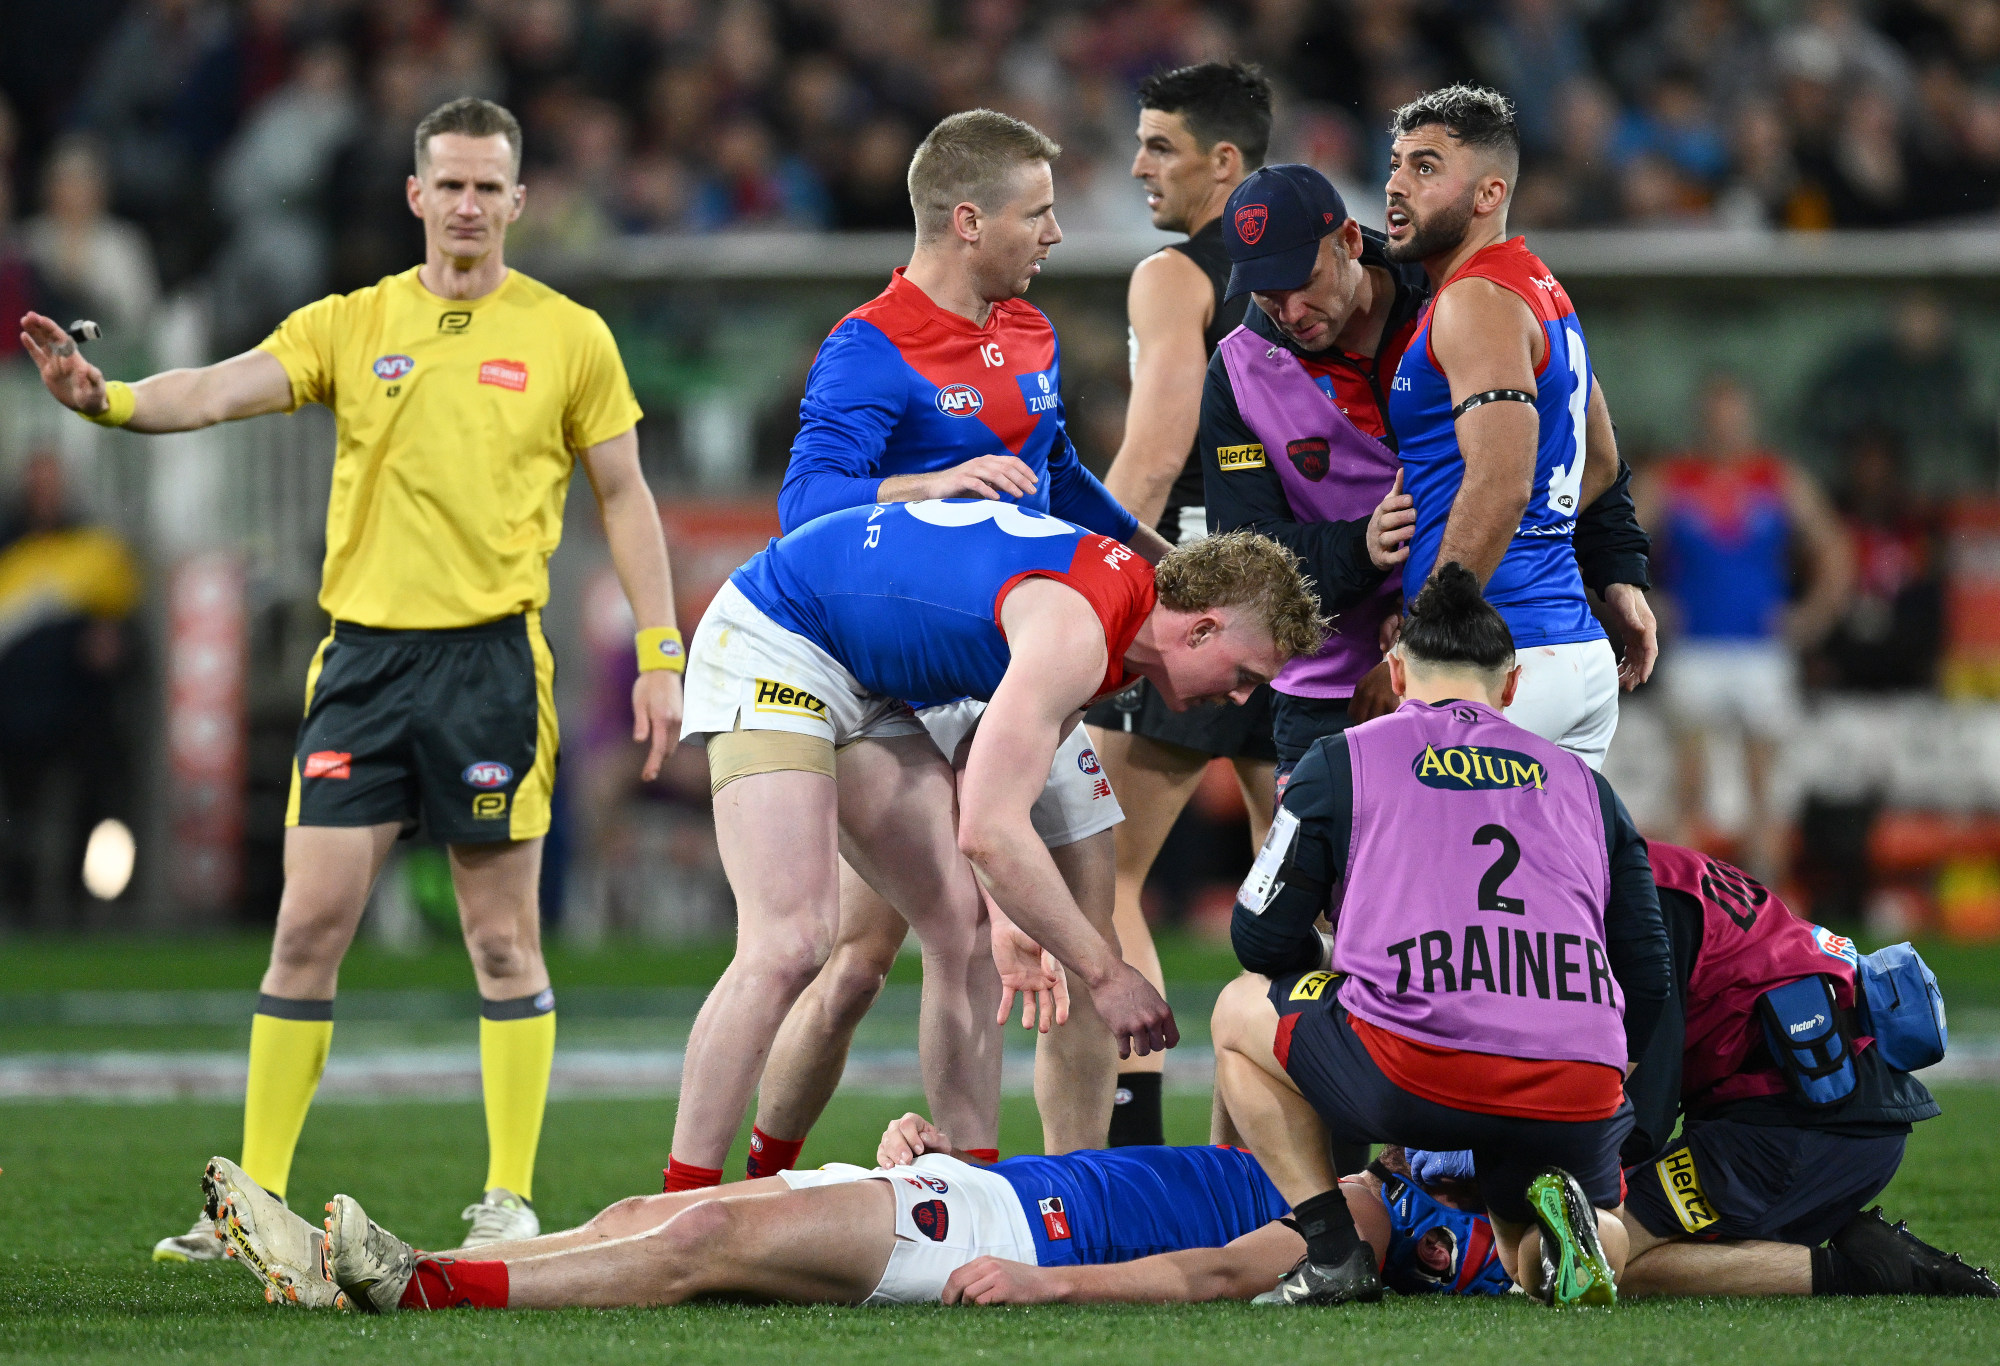 Angus Brayshaw was knocked unconscious in a collision with Brayden Maynard.